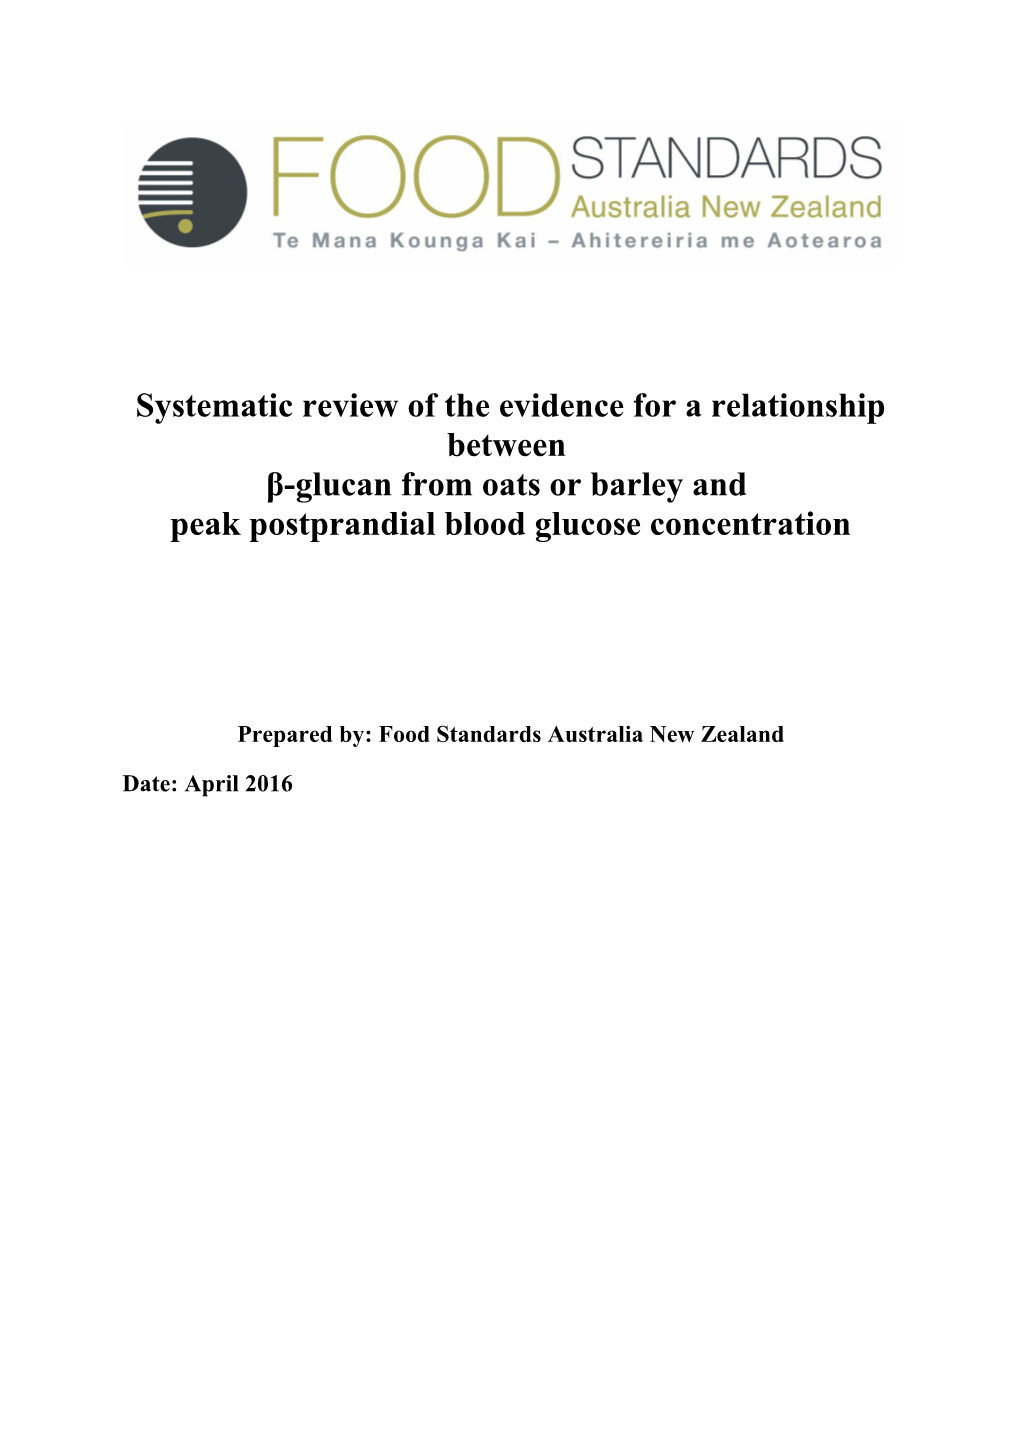 Systematic Review of the Evidence for a Relationship Between